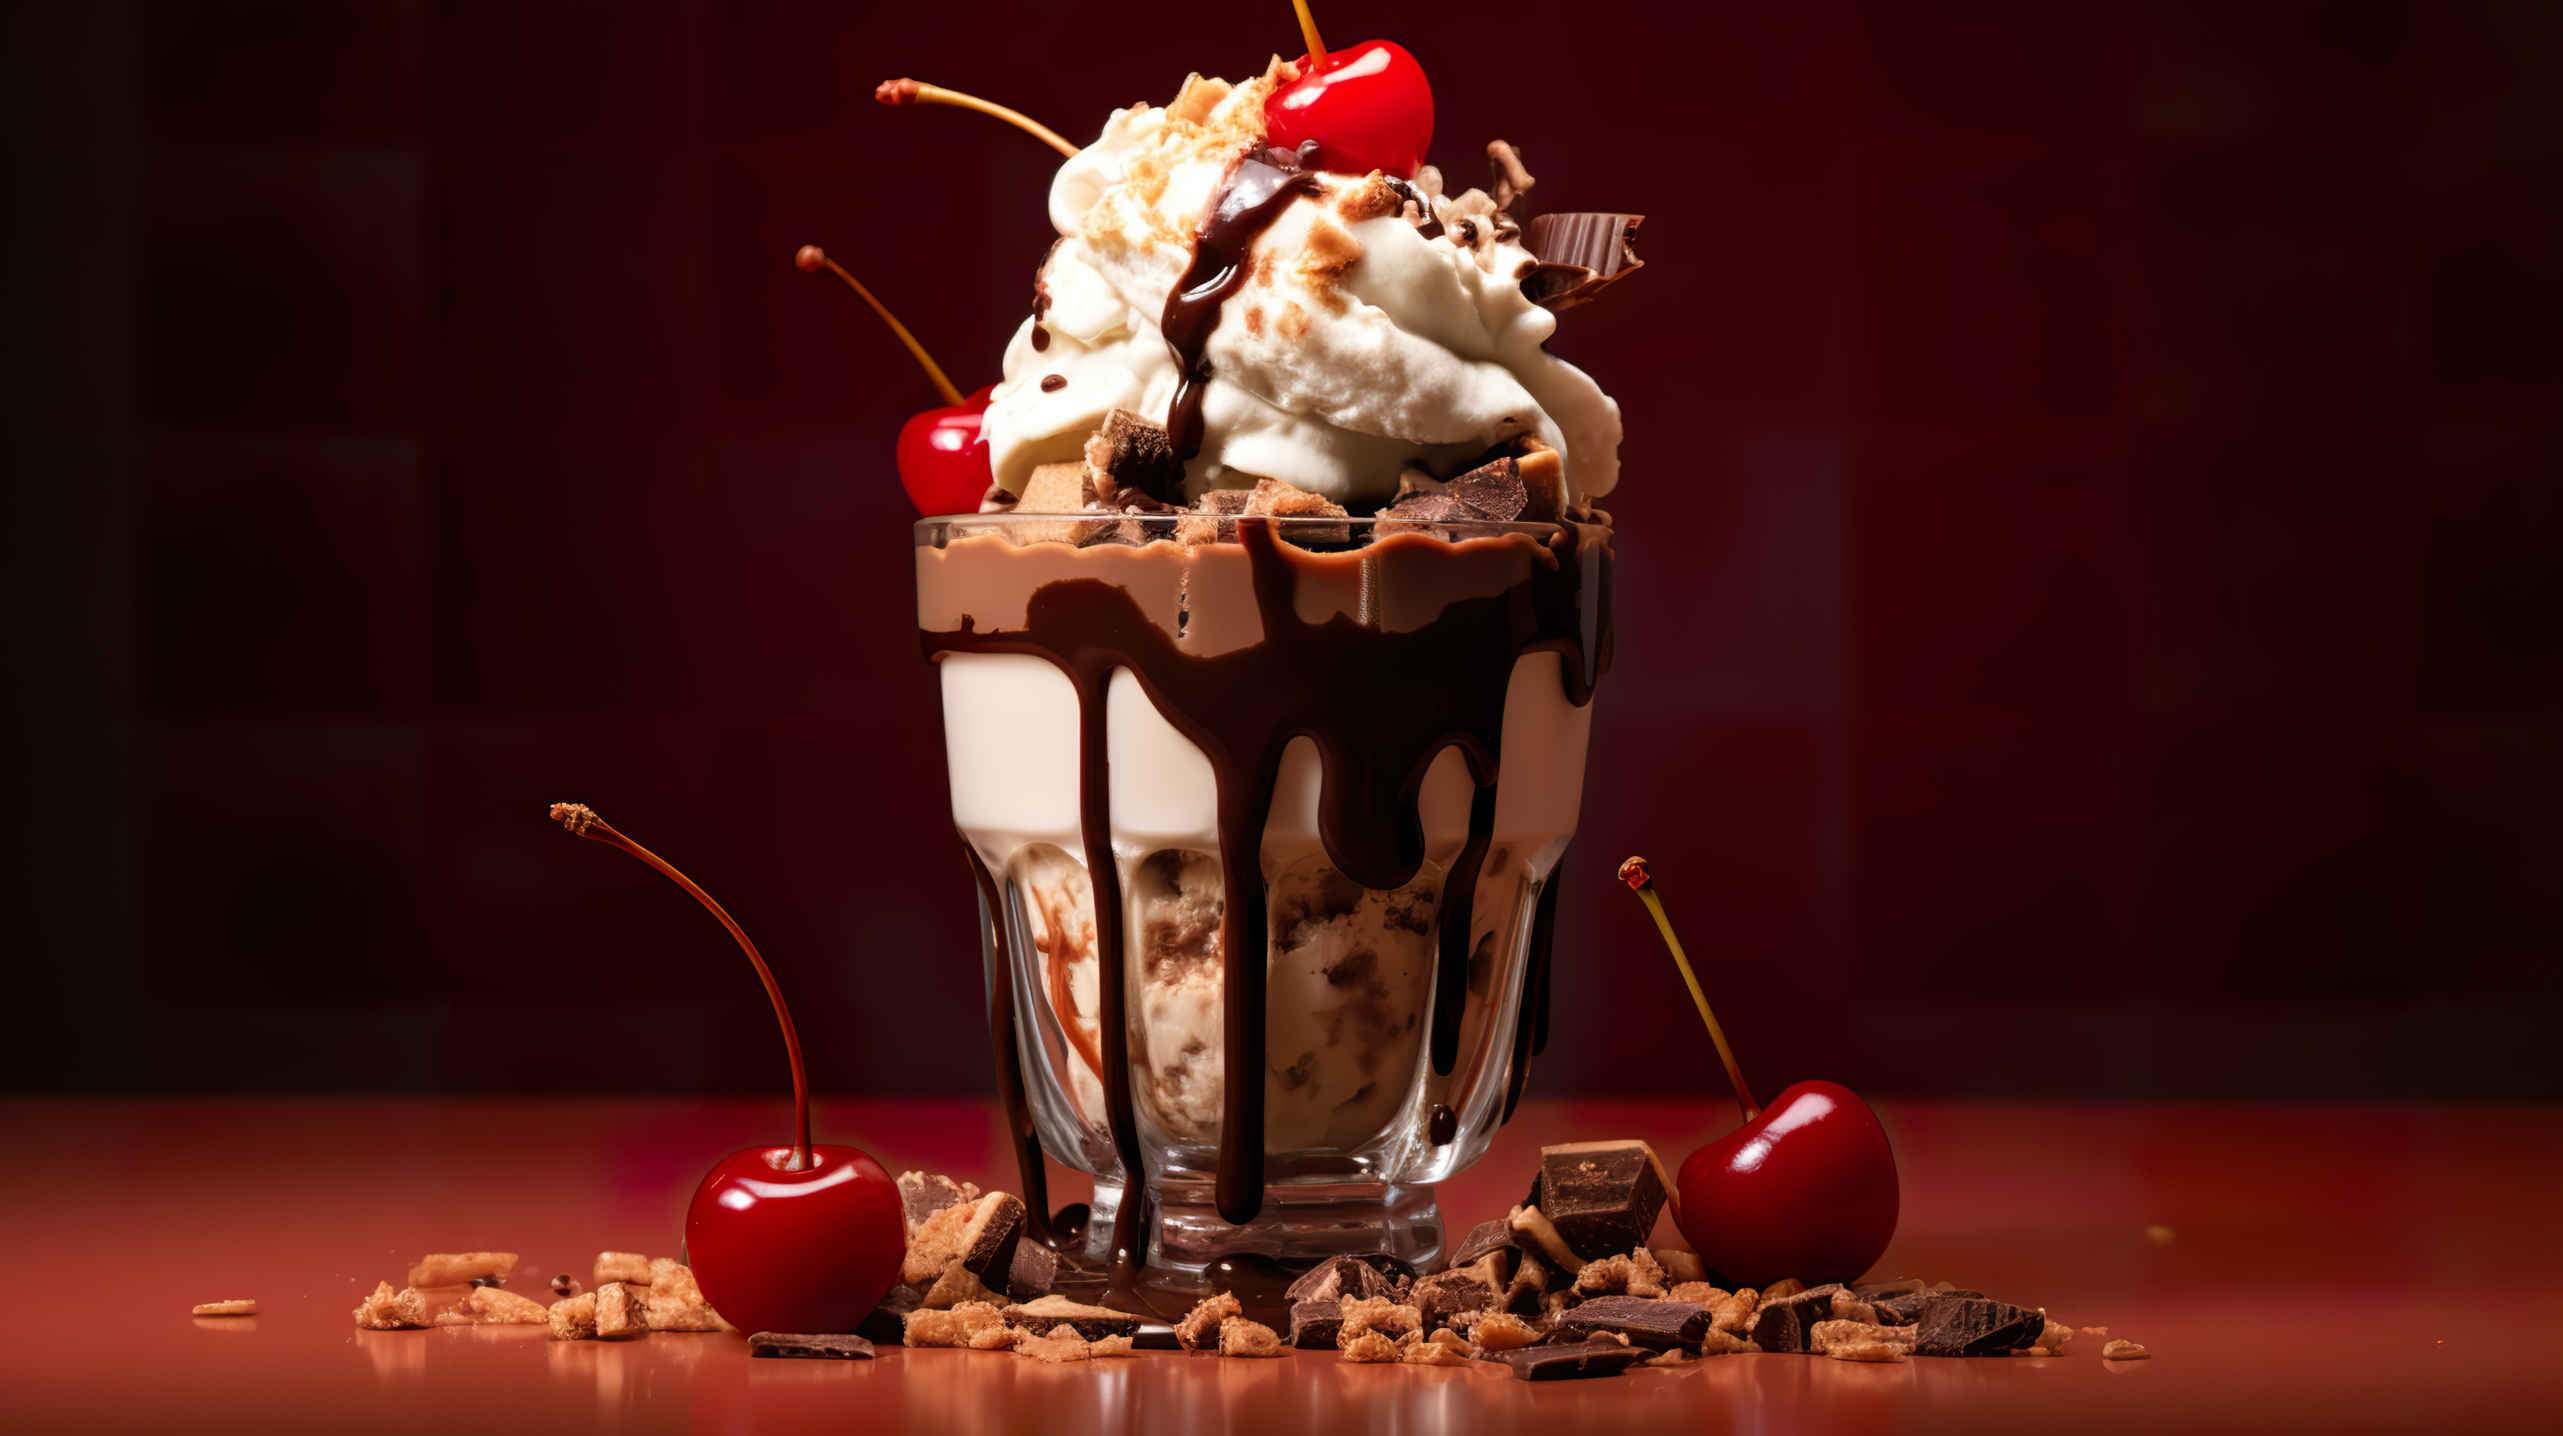 Decadent chocolate sundae topped with whipped cream and cherries, surrounded by chocolate pieces, perfect as a HD ice cream wallpaper for desktops.